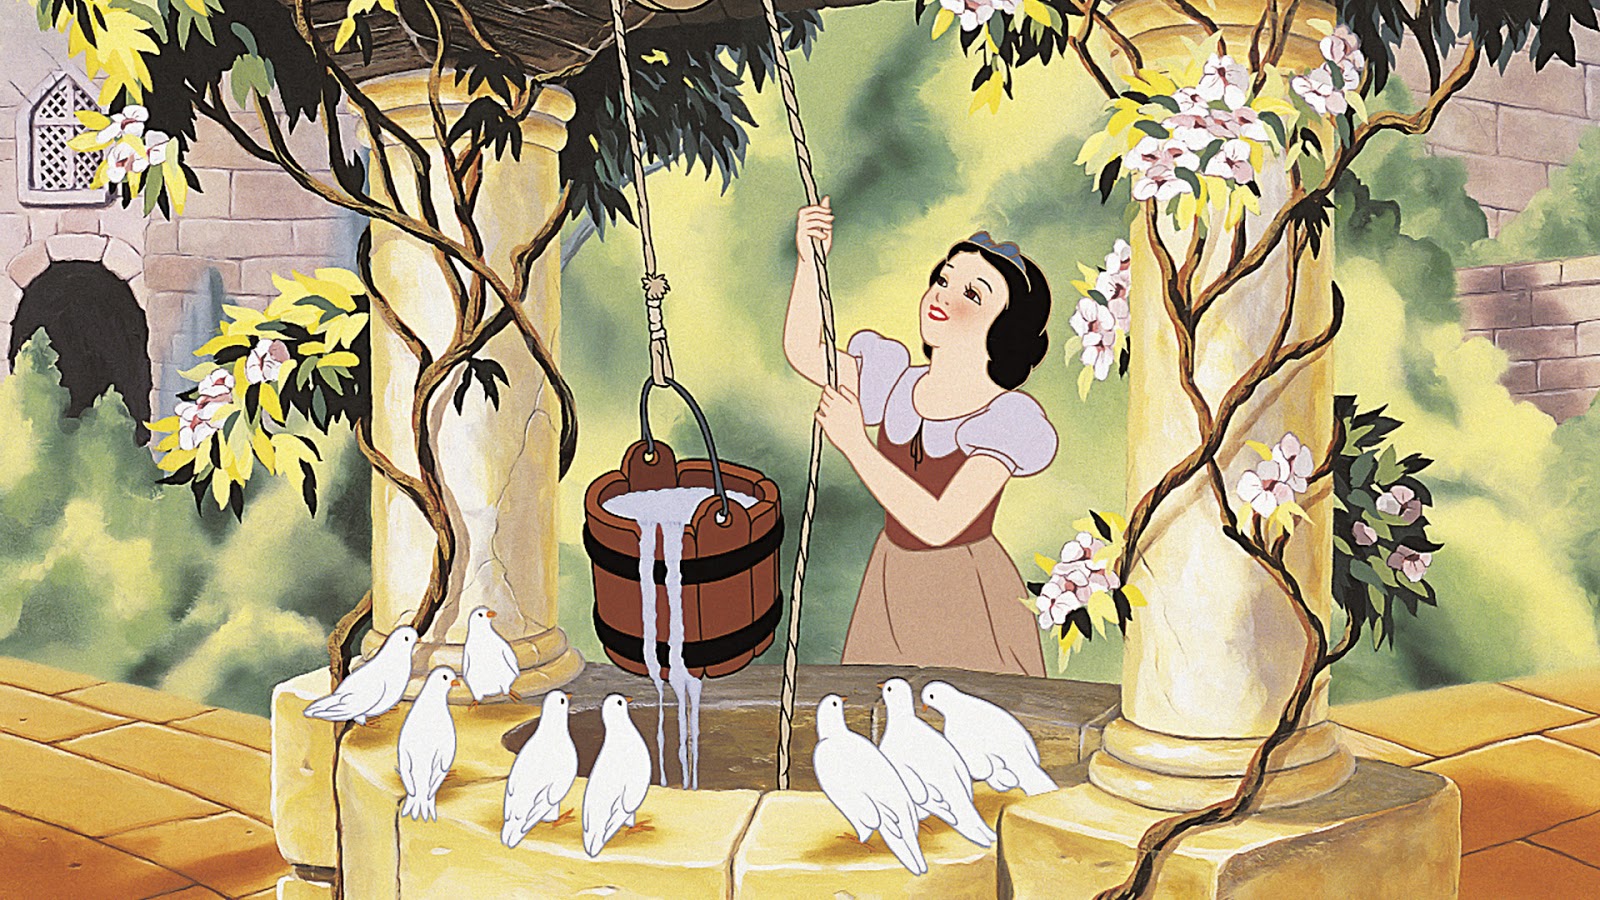 Snow White HD Wallpaper High Definition iPhone